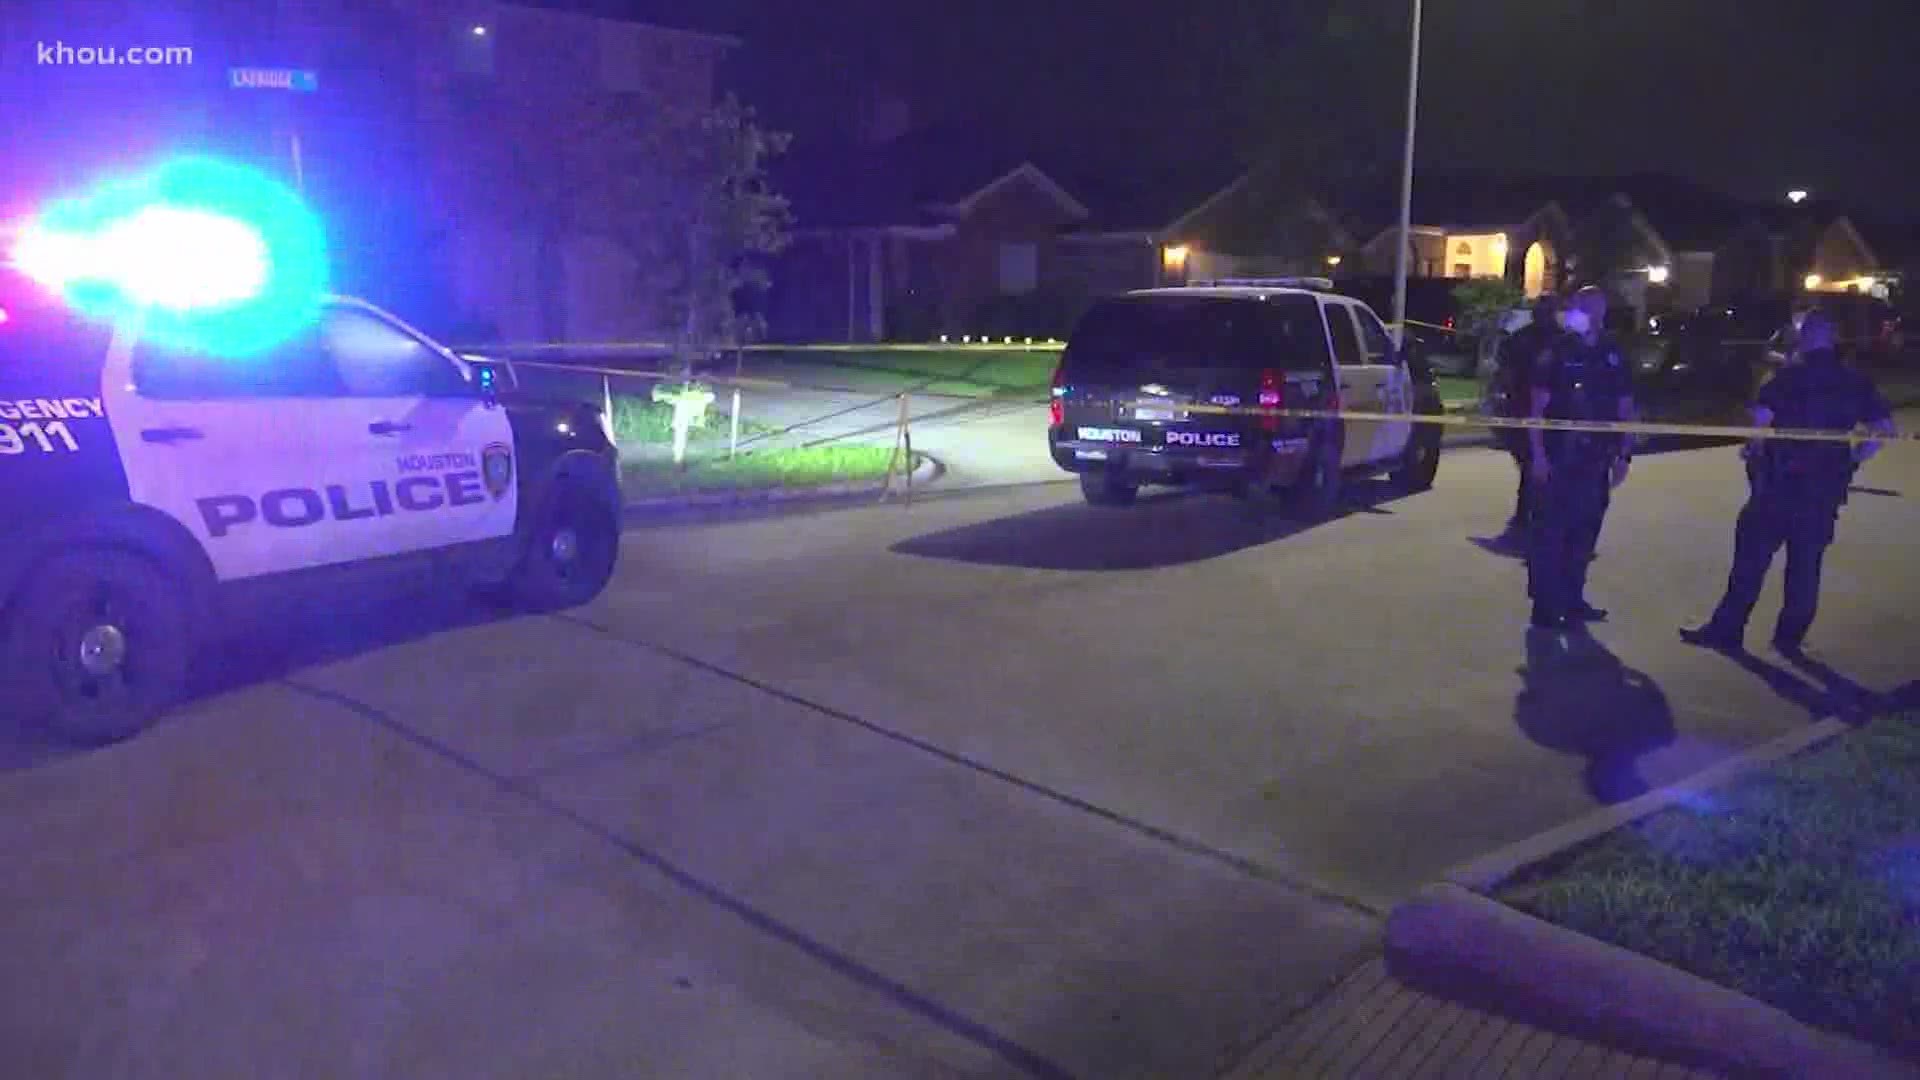 Three Houston police officers were involved in a fatal shooting that left a 38-year-old man dead outside a southeast Houston home overnight.